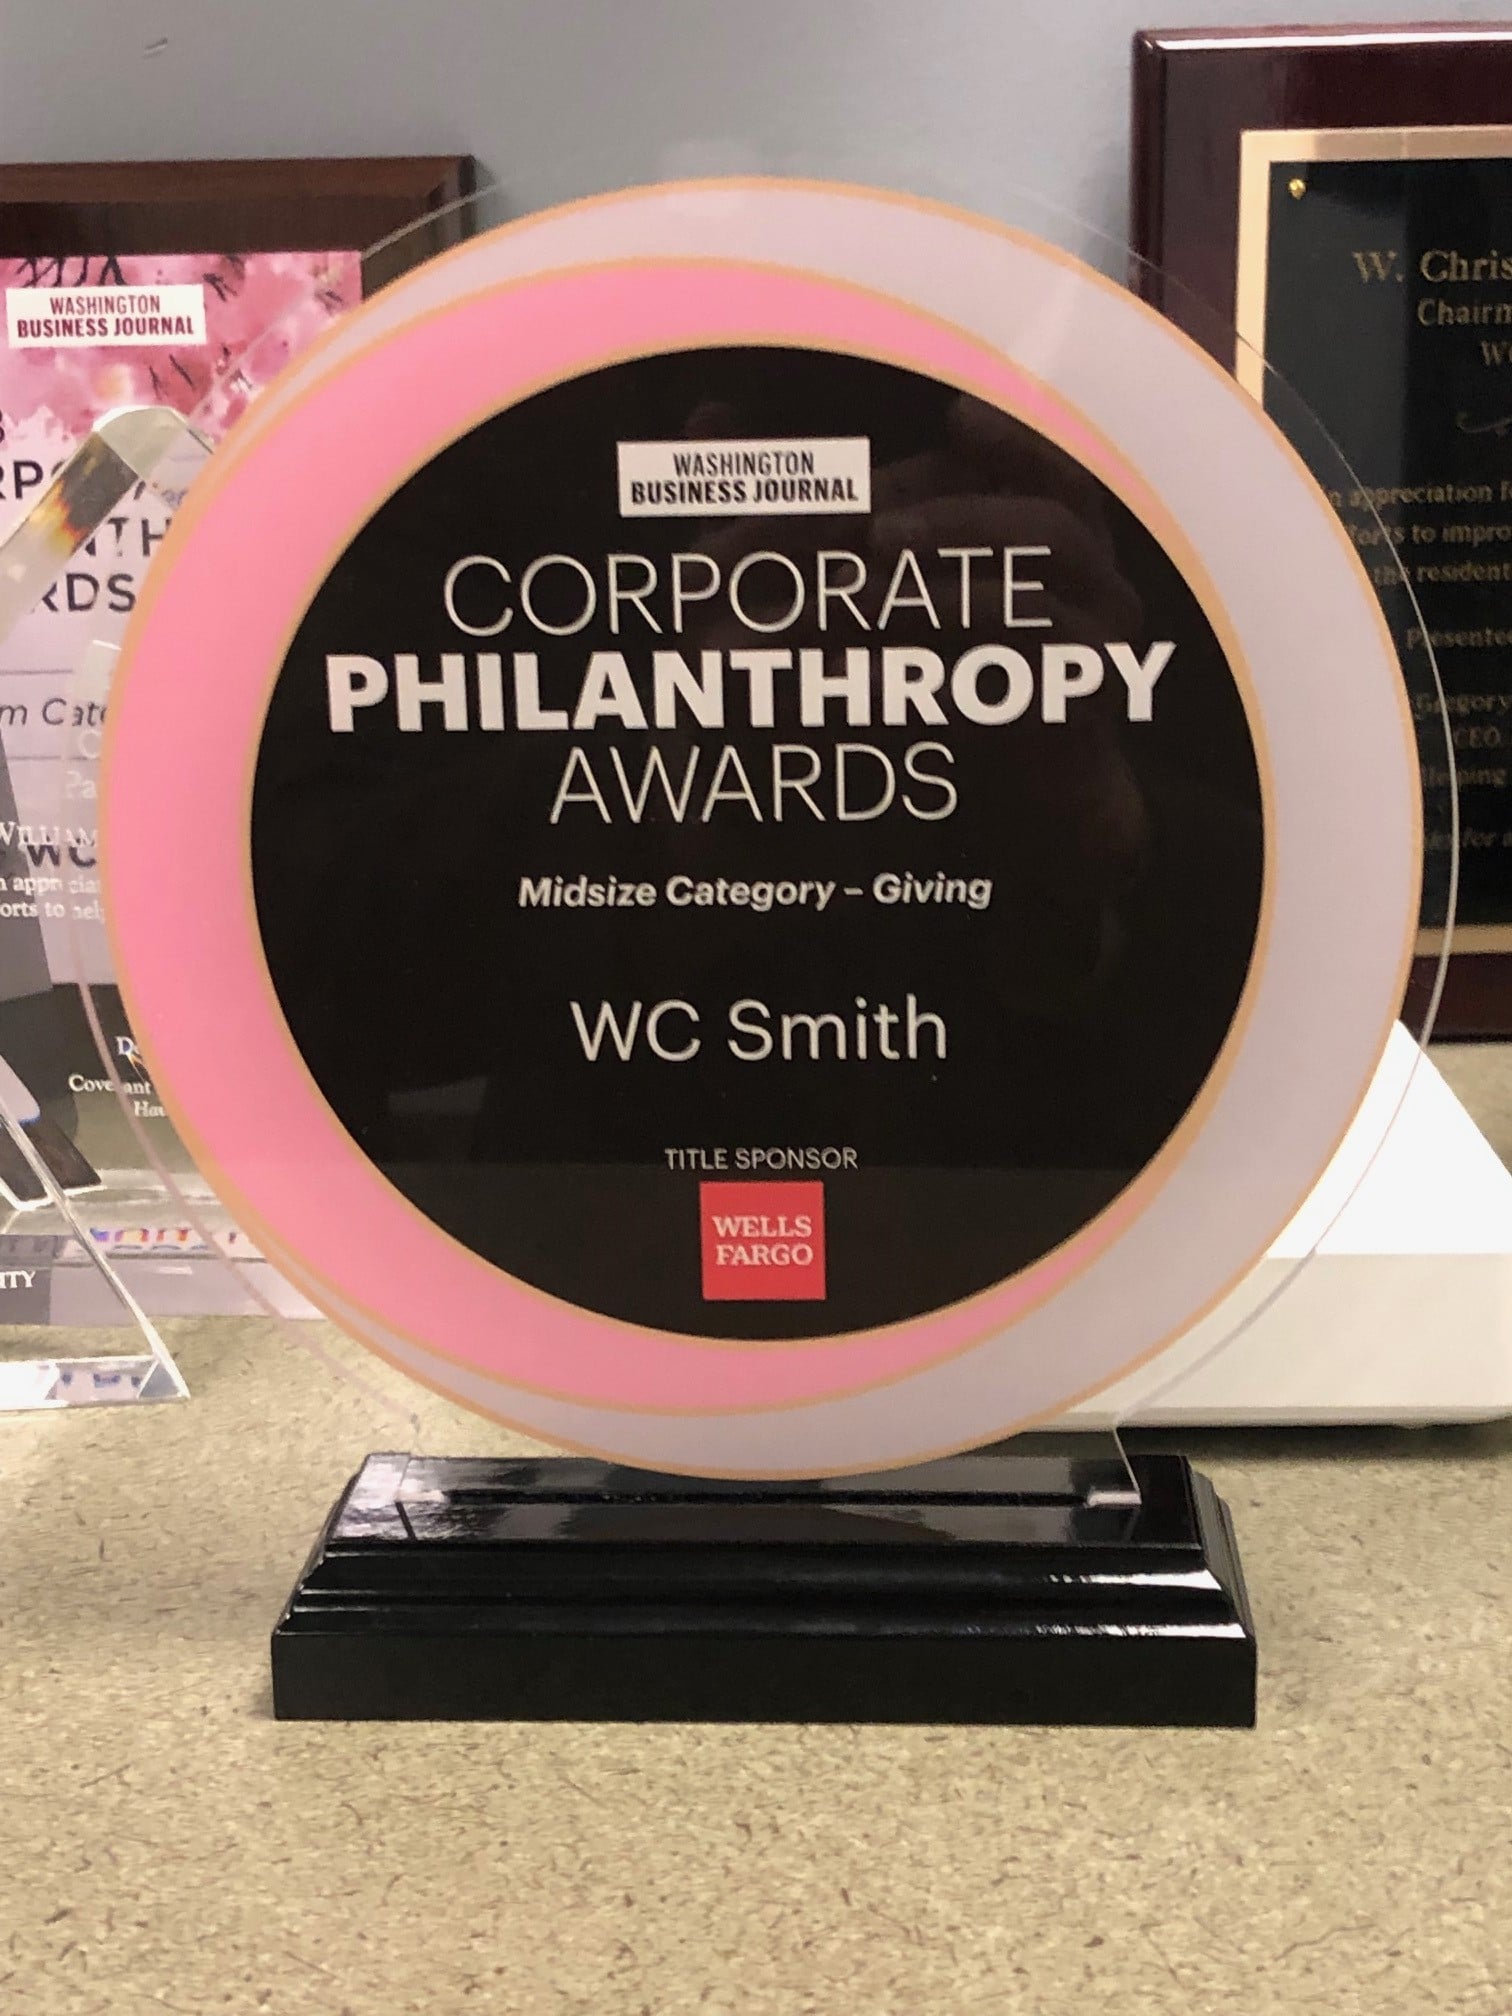 WC Smith Wins Corporate Philanthropy Awards from Washington Business Journal